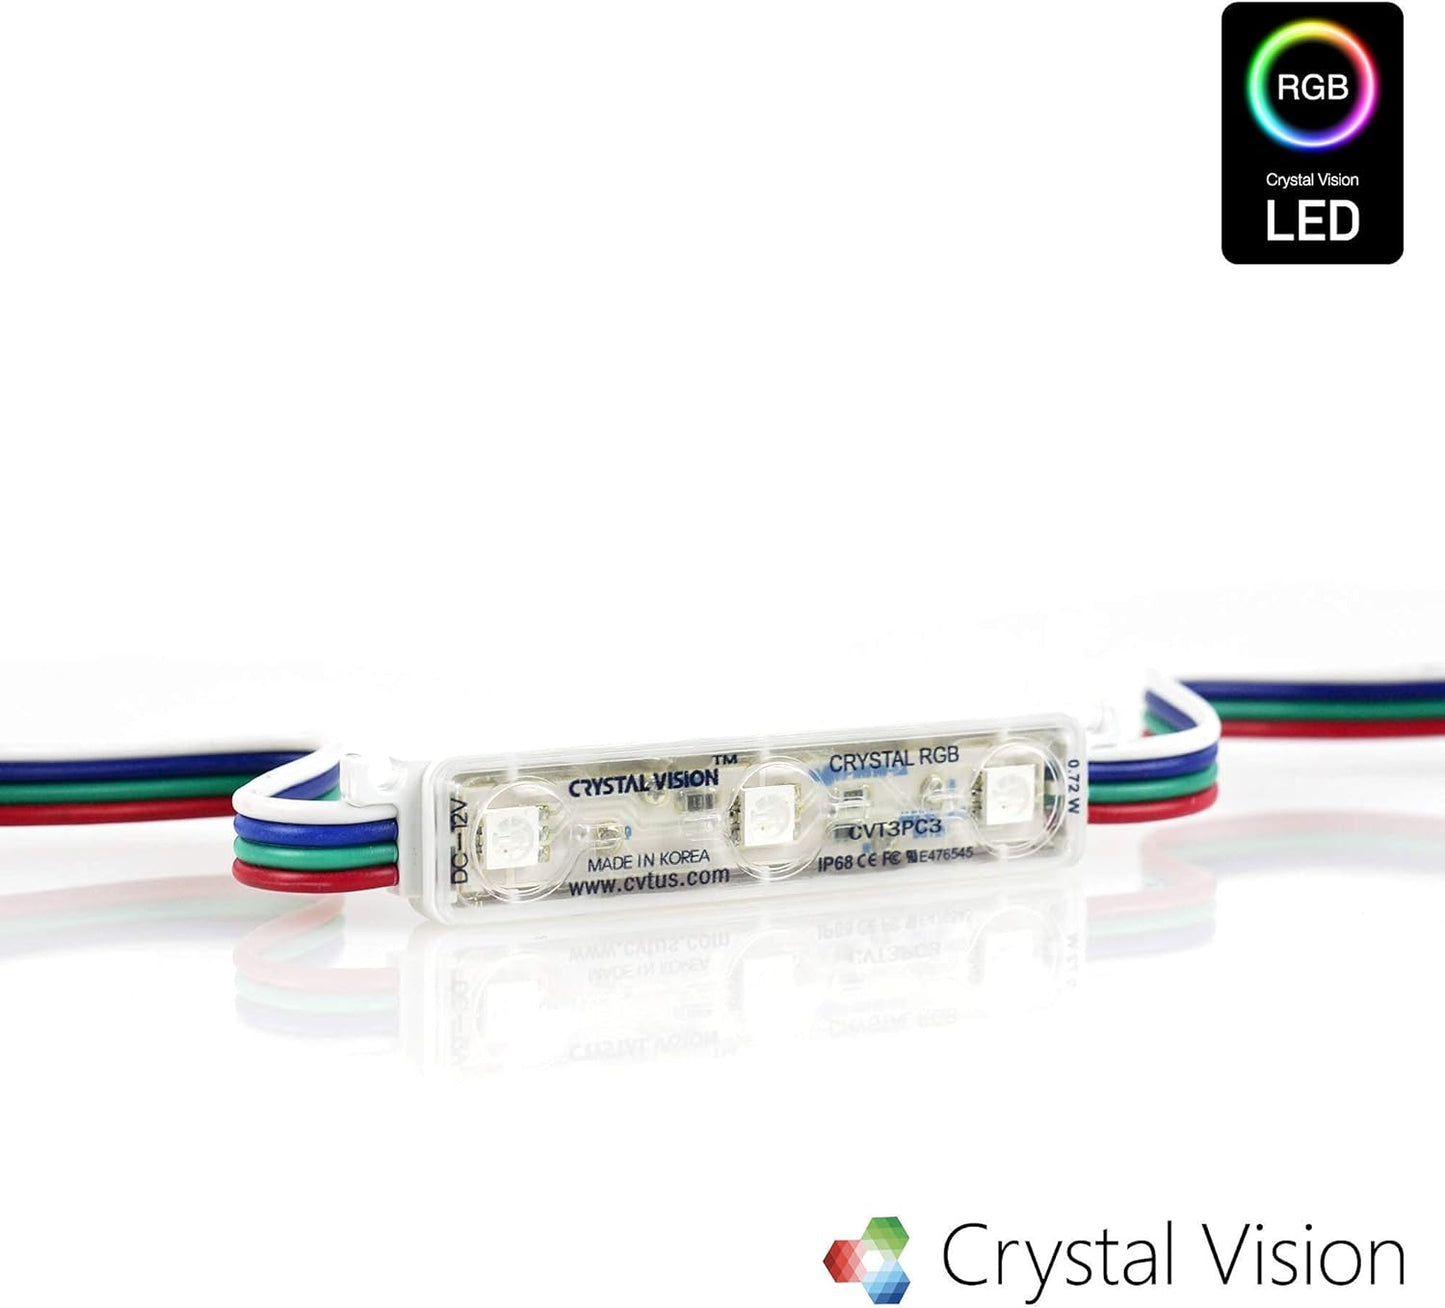 Crystal Vision Korean Genuine 5050 Bright LED Module Store Front Window Kit / Plug-in and Play / 72W Made in Korea w/ Warranty (RGB 25ft x2)